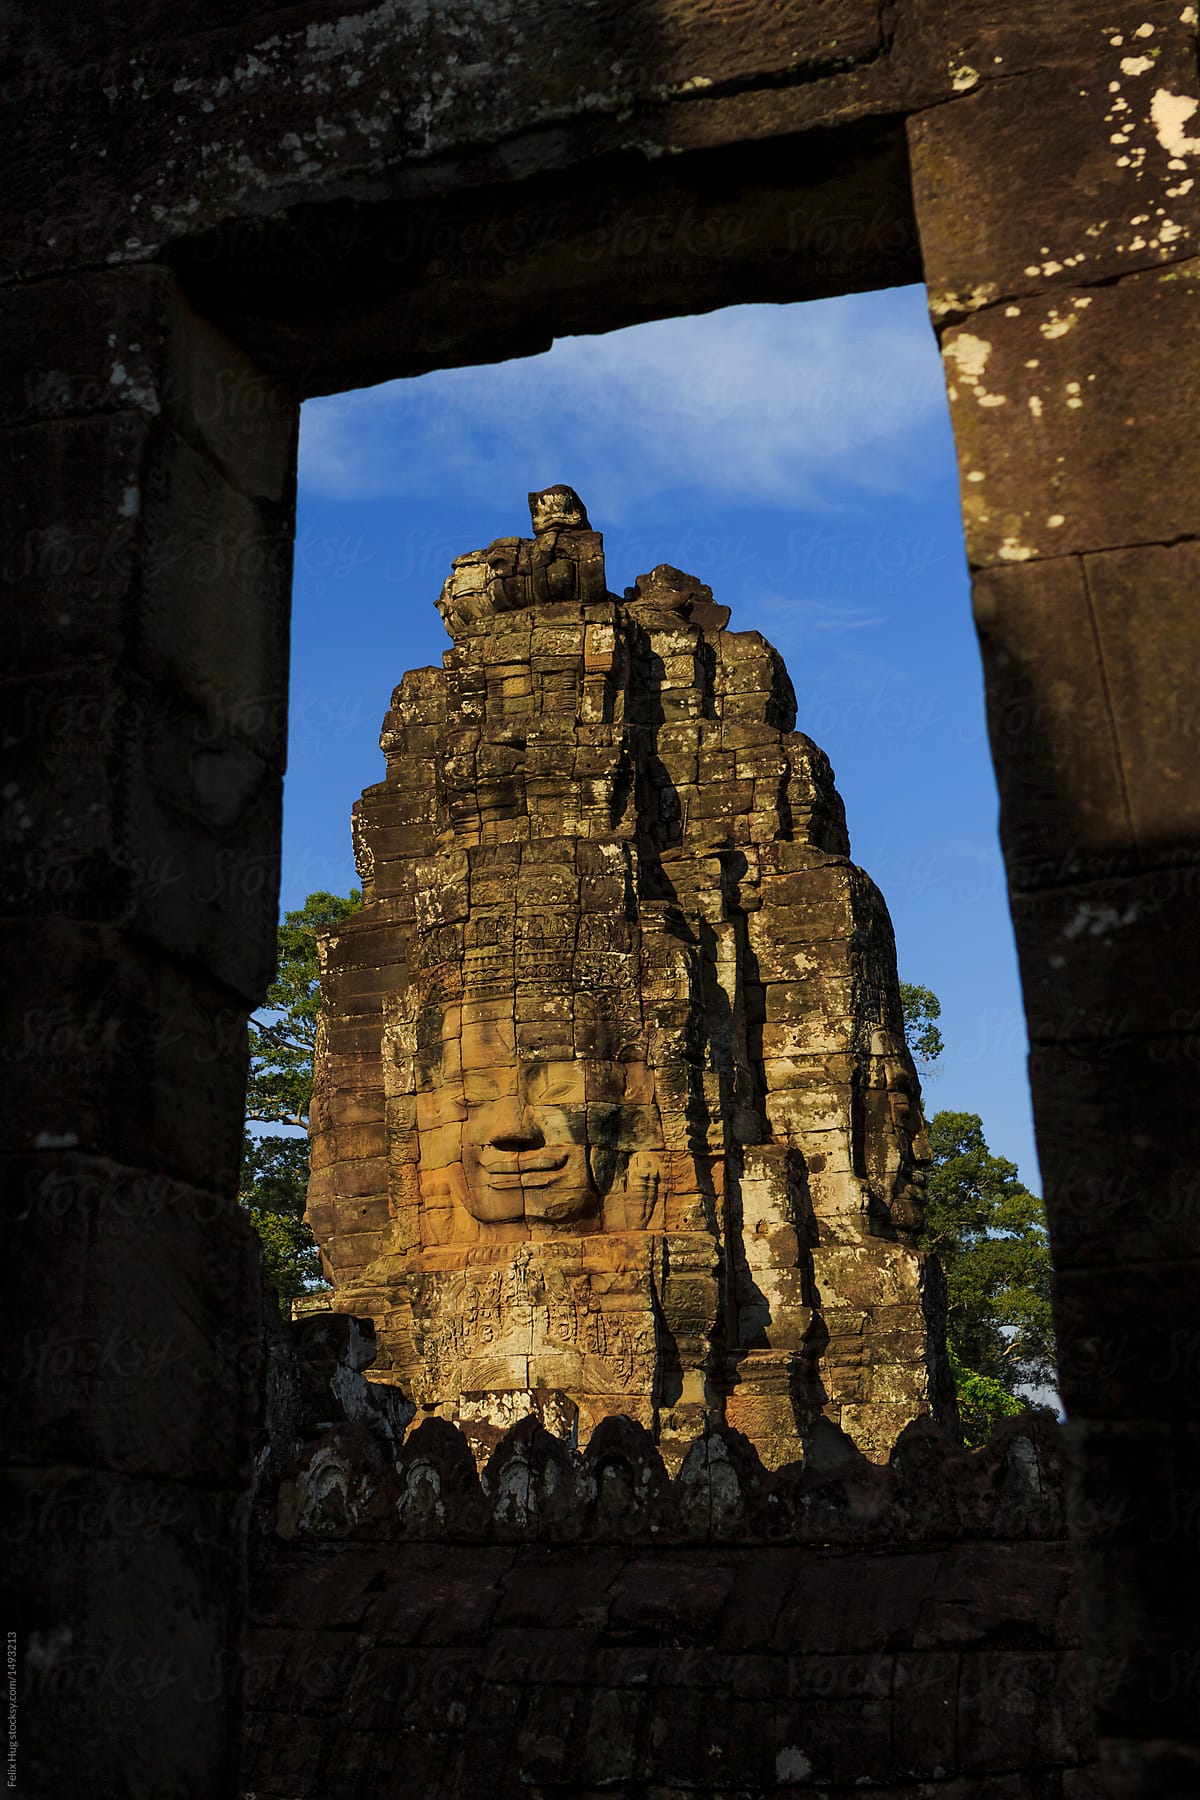 the famous stone faces of the Bayon Temple at Angkor Wat . The view is framed by a stone window